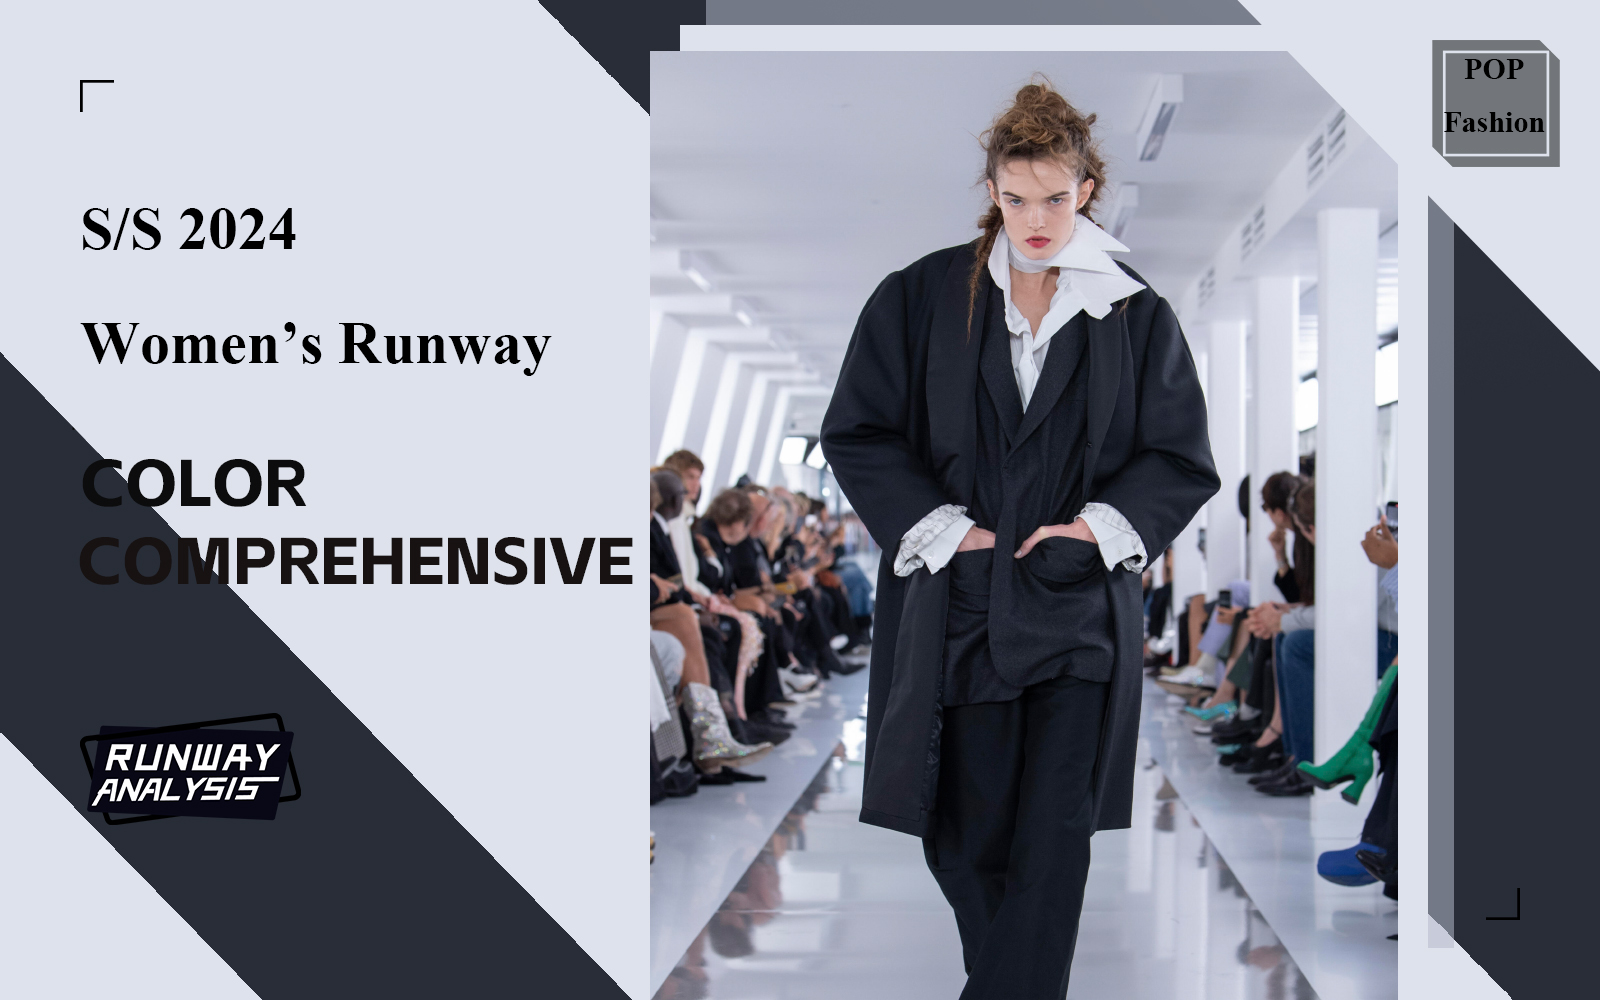 S/S 2024 Key Colors -- The Comprehensive Analysis of Women's Runway (Colorless)